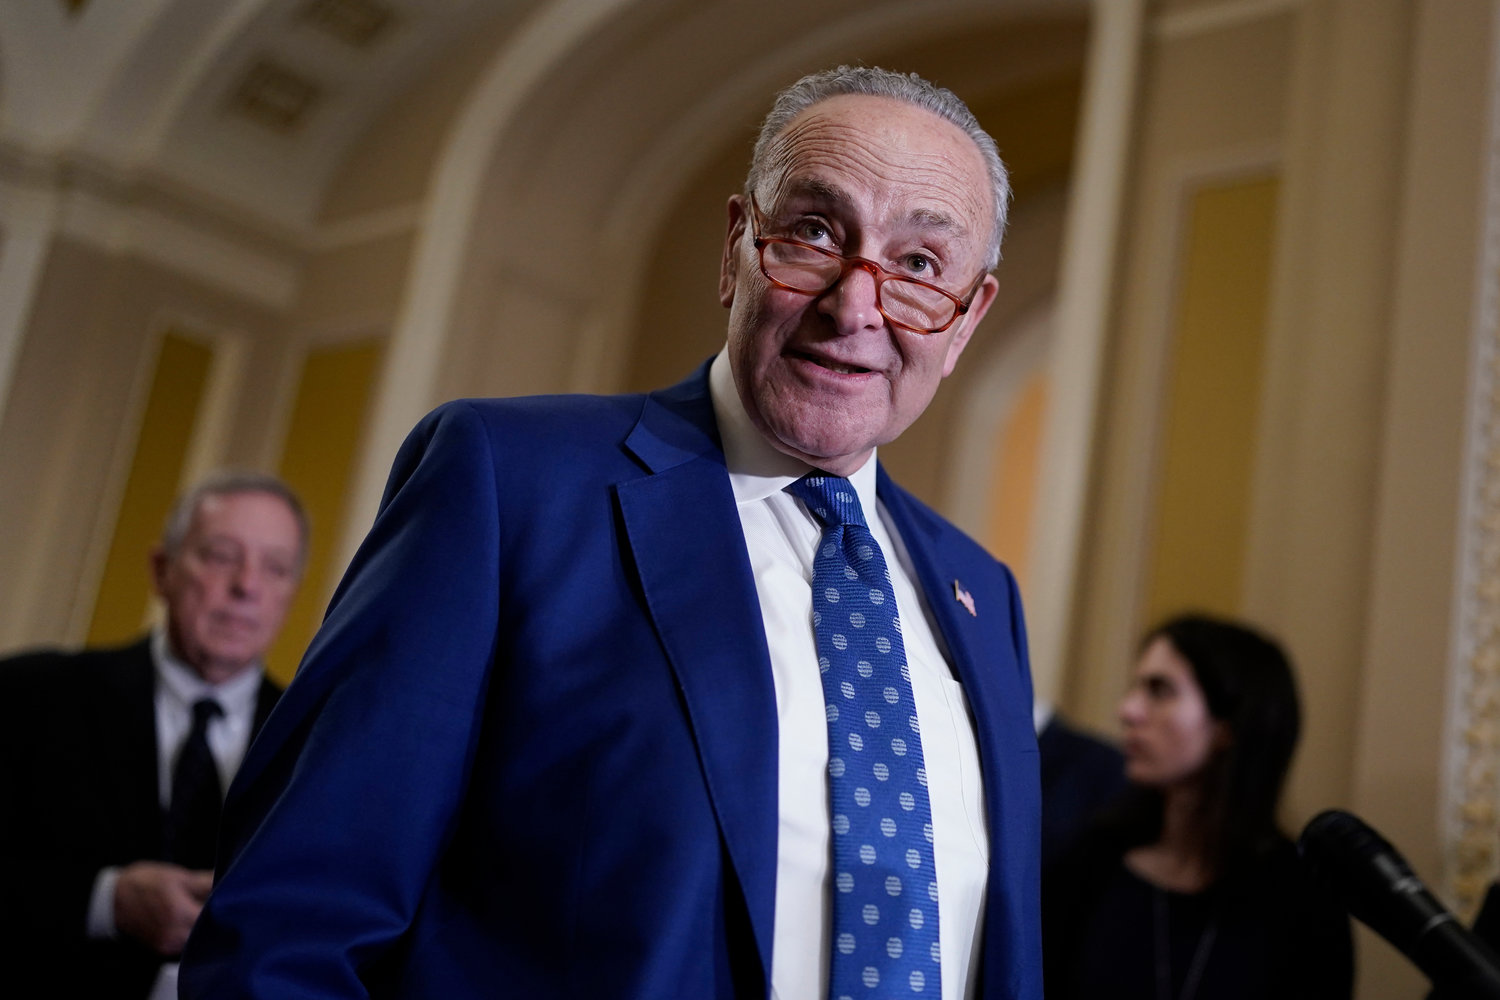 Senate Majority Leader Chuck Schumer, D-N.Y., speaks to reporters at the Capitol in Washington, Nov. 15, 2022. Democrats celebrating a successful effort to keep control of the U.S. Senate this year will soon confront a 2024 campaign that could prove more challenging.